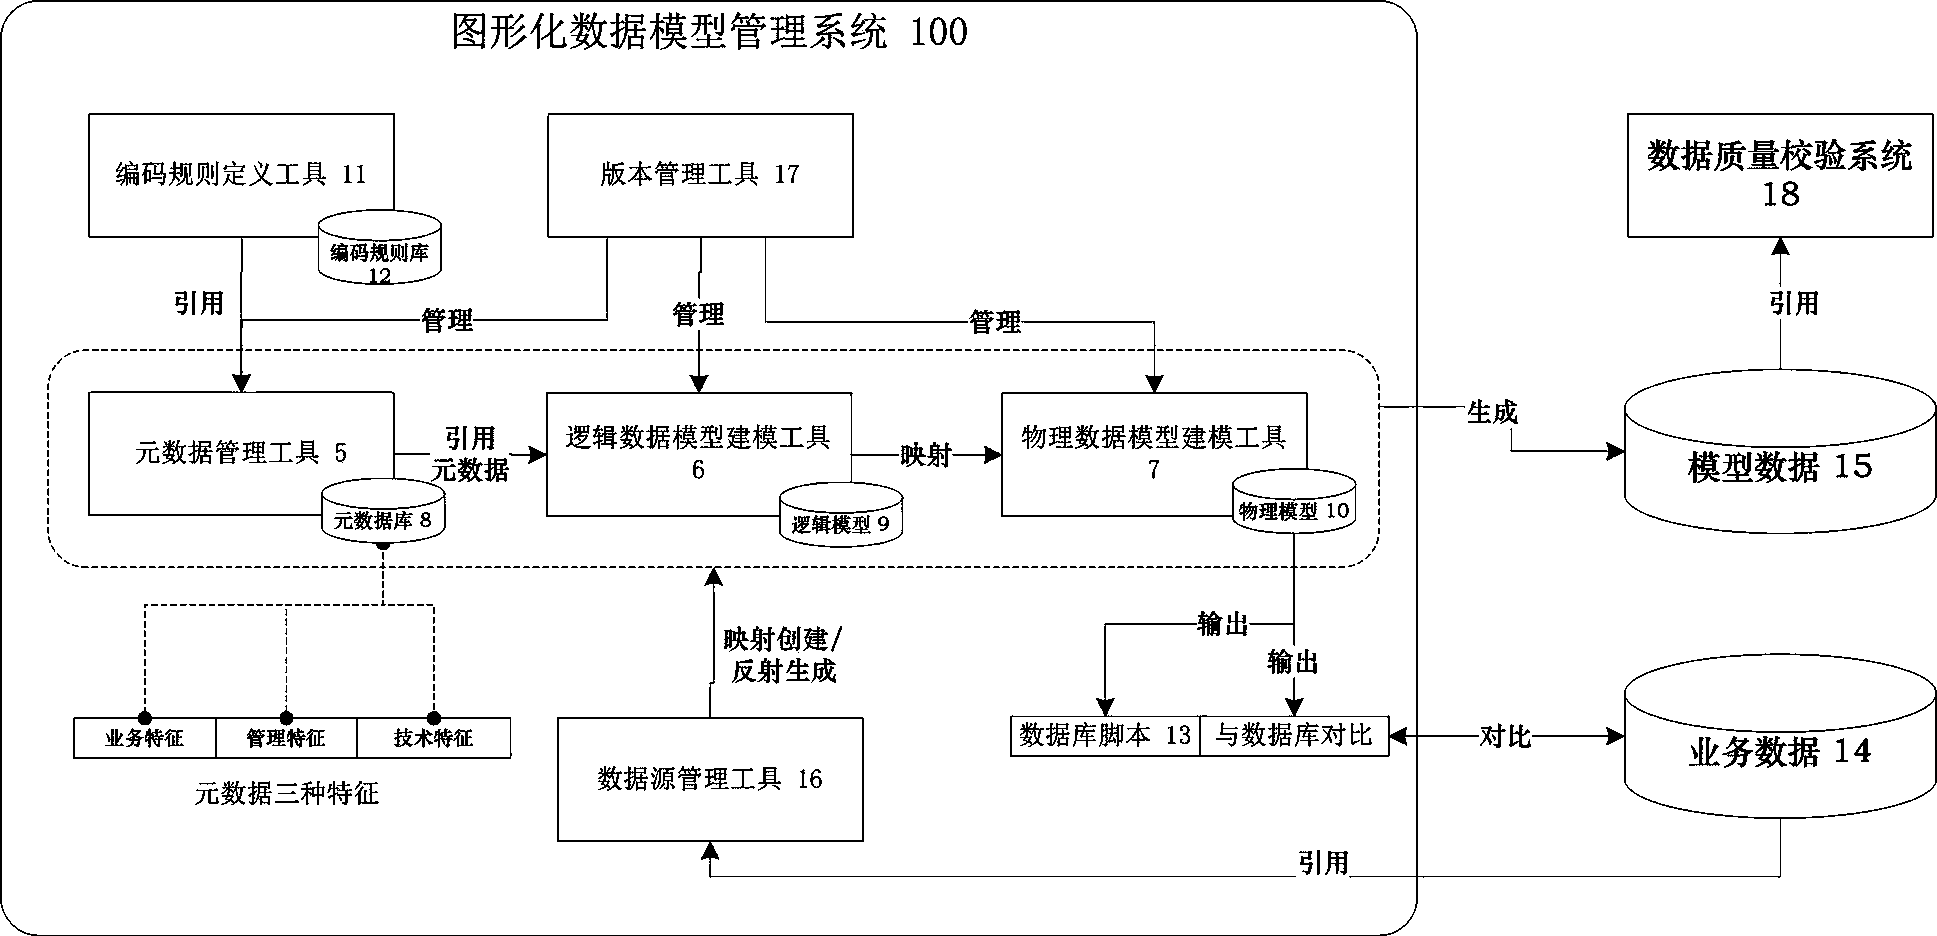 Graphical data model managing method and system based on metadata